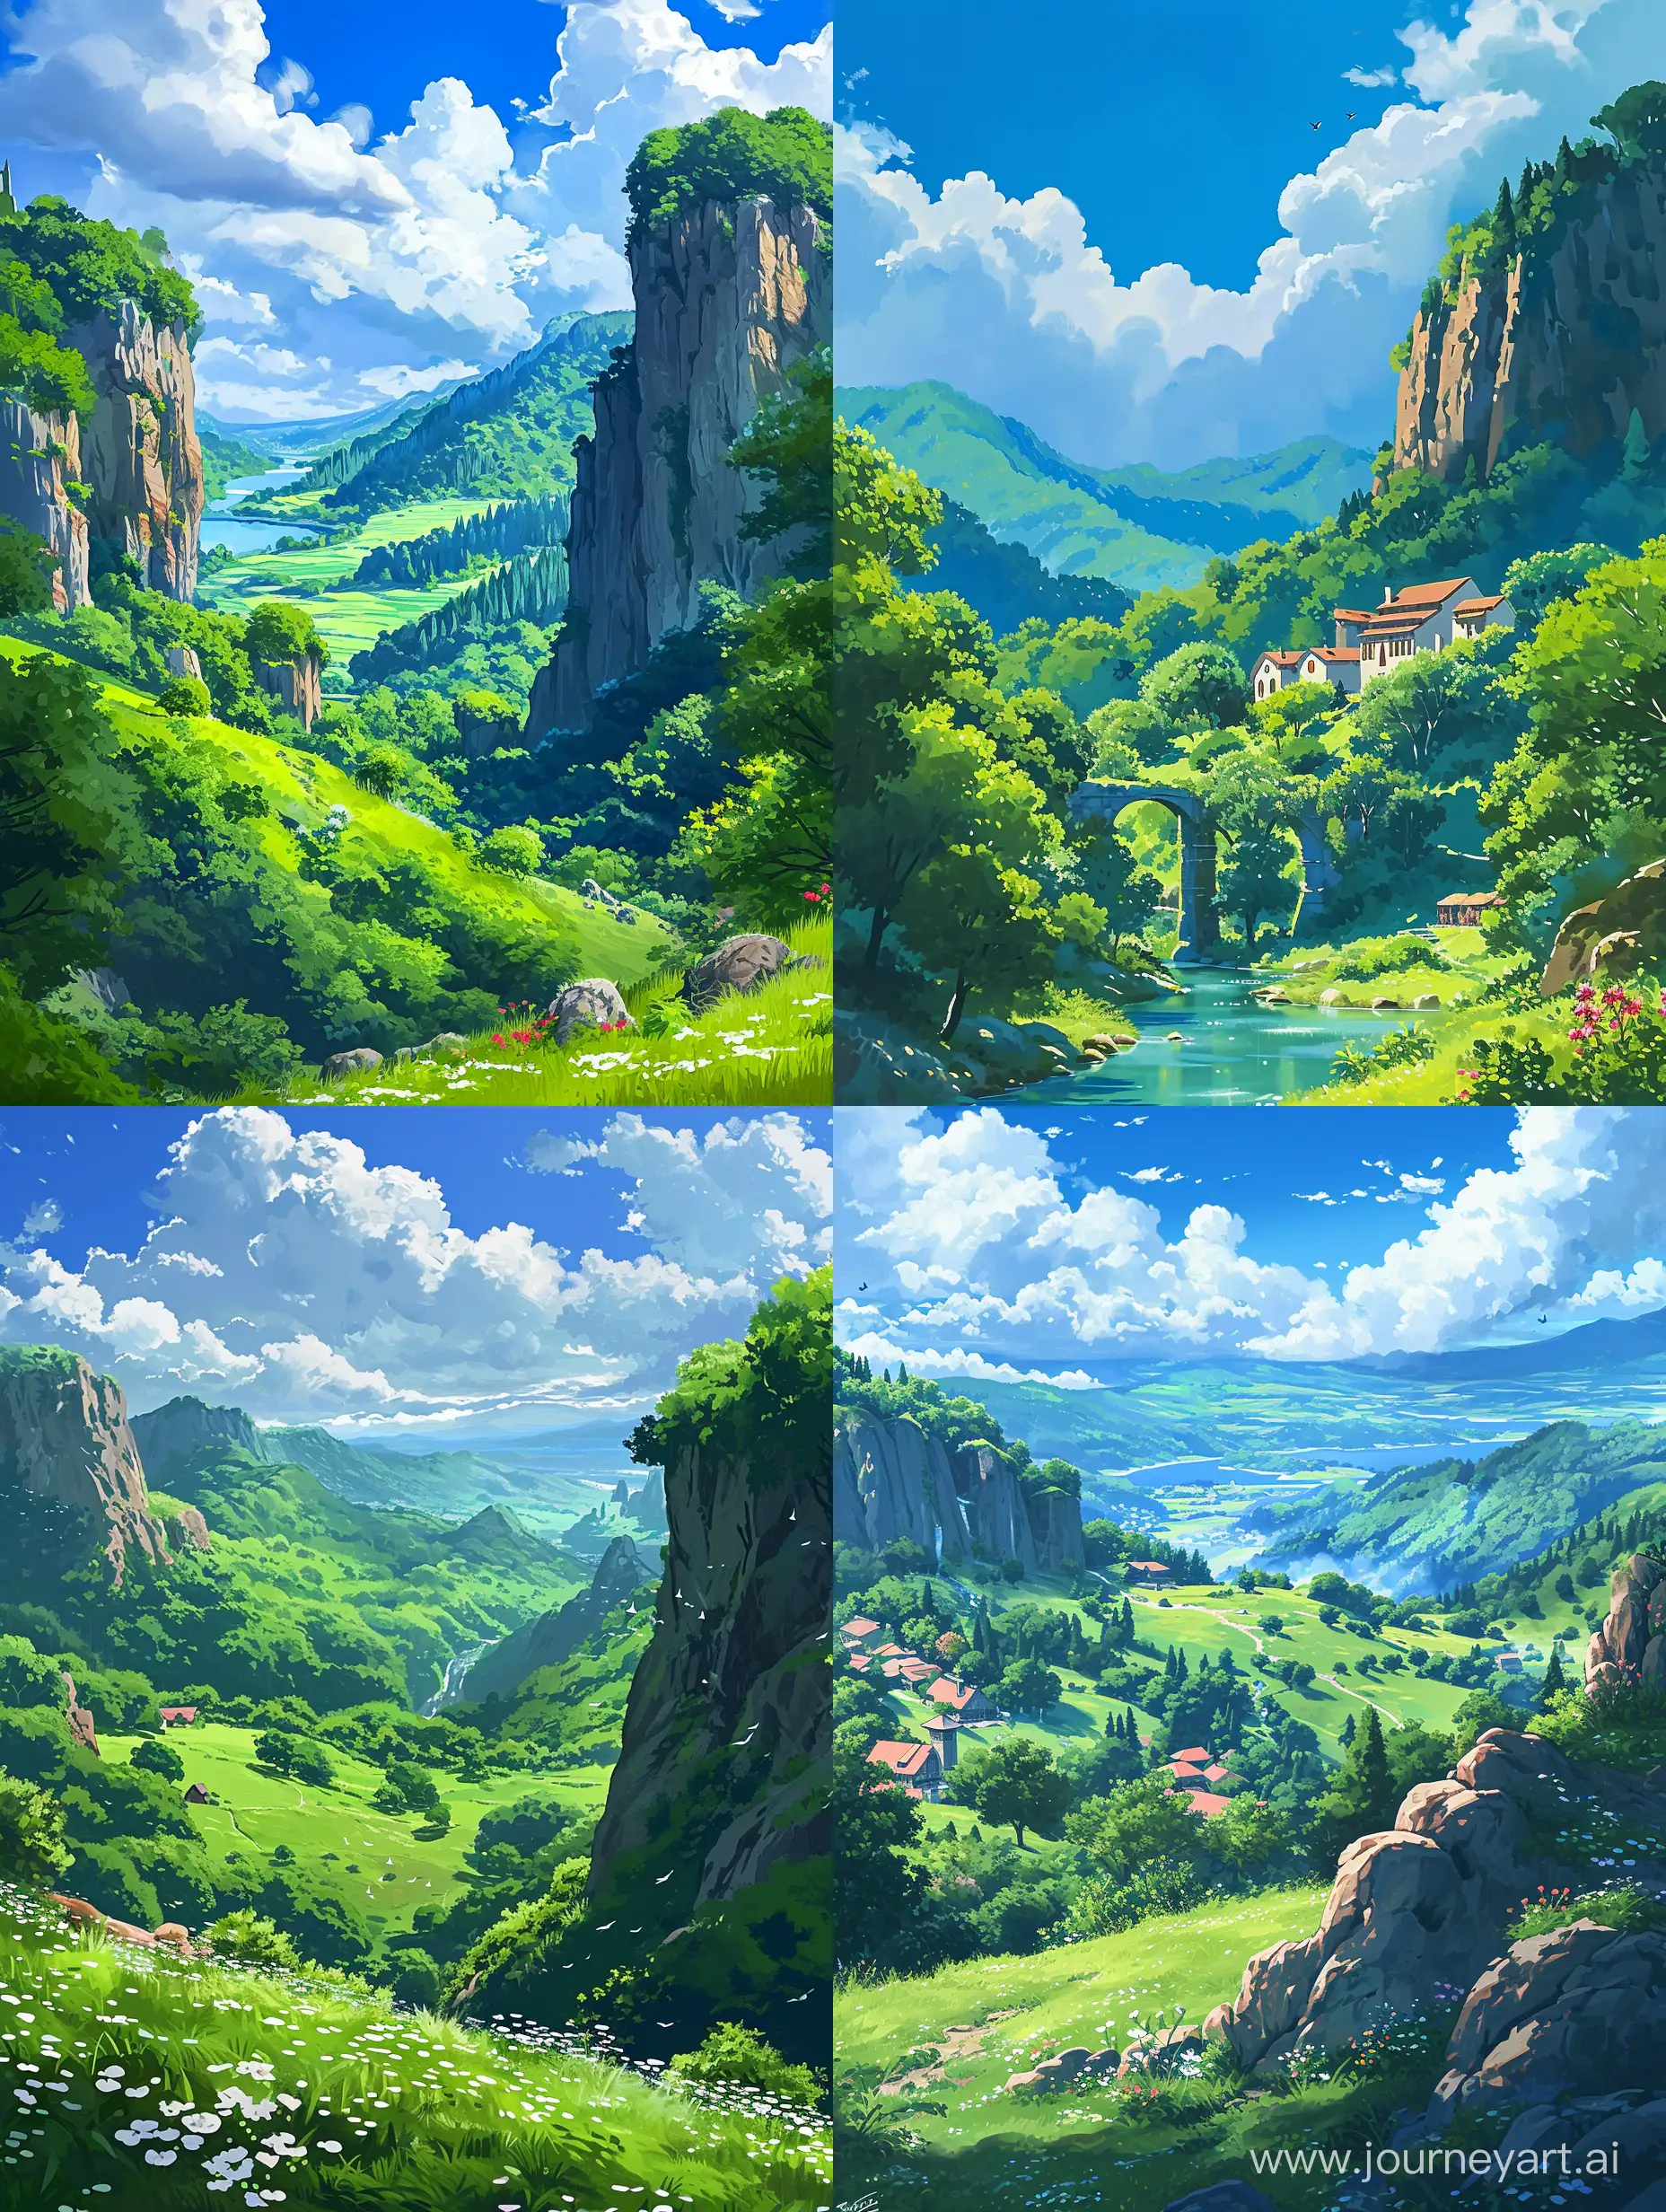 A picture of a beautiful landscape inspired by Studio Ghibli Art Style